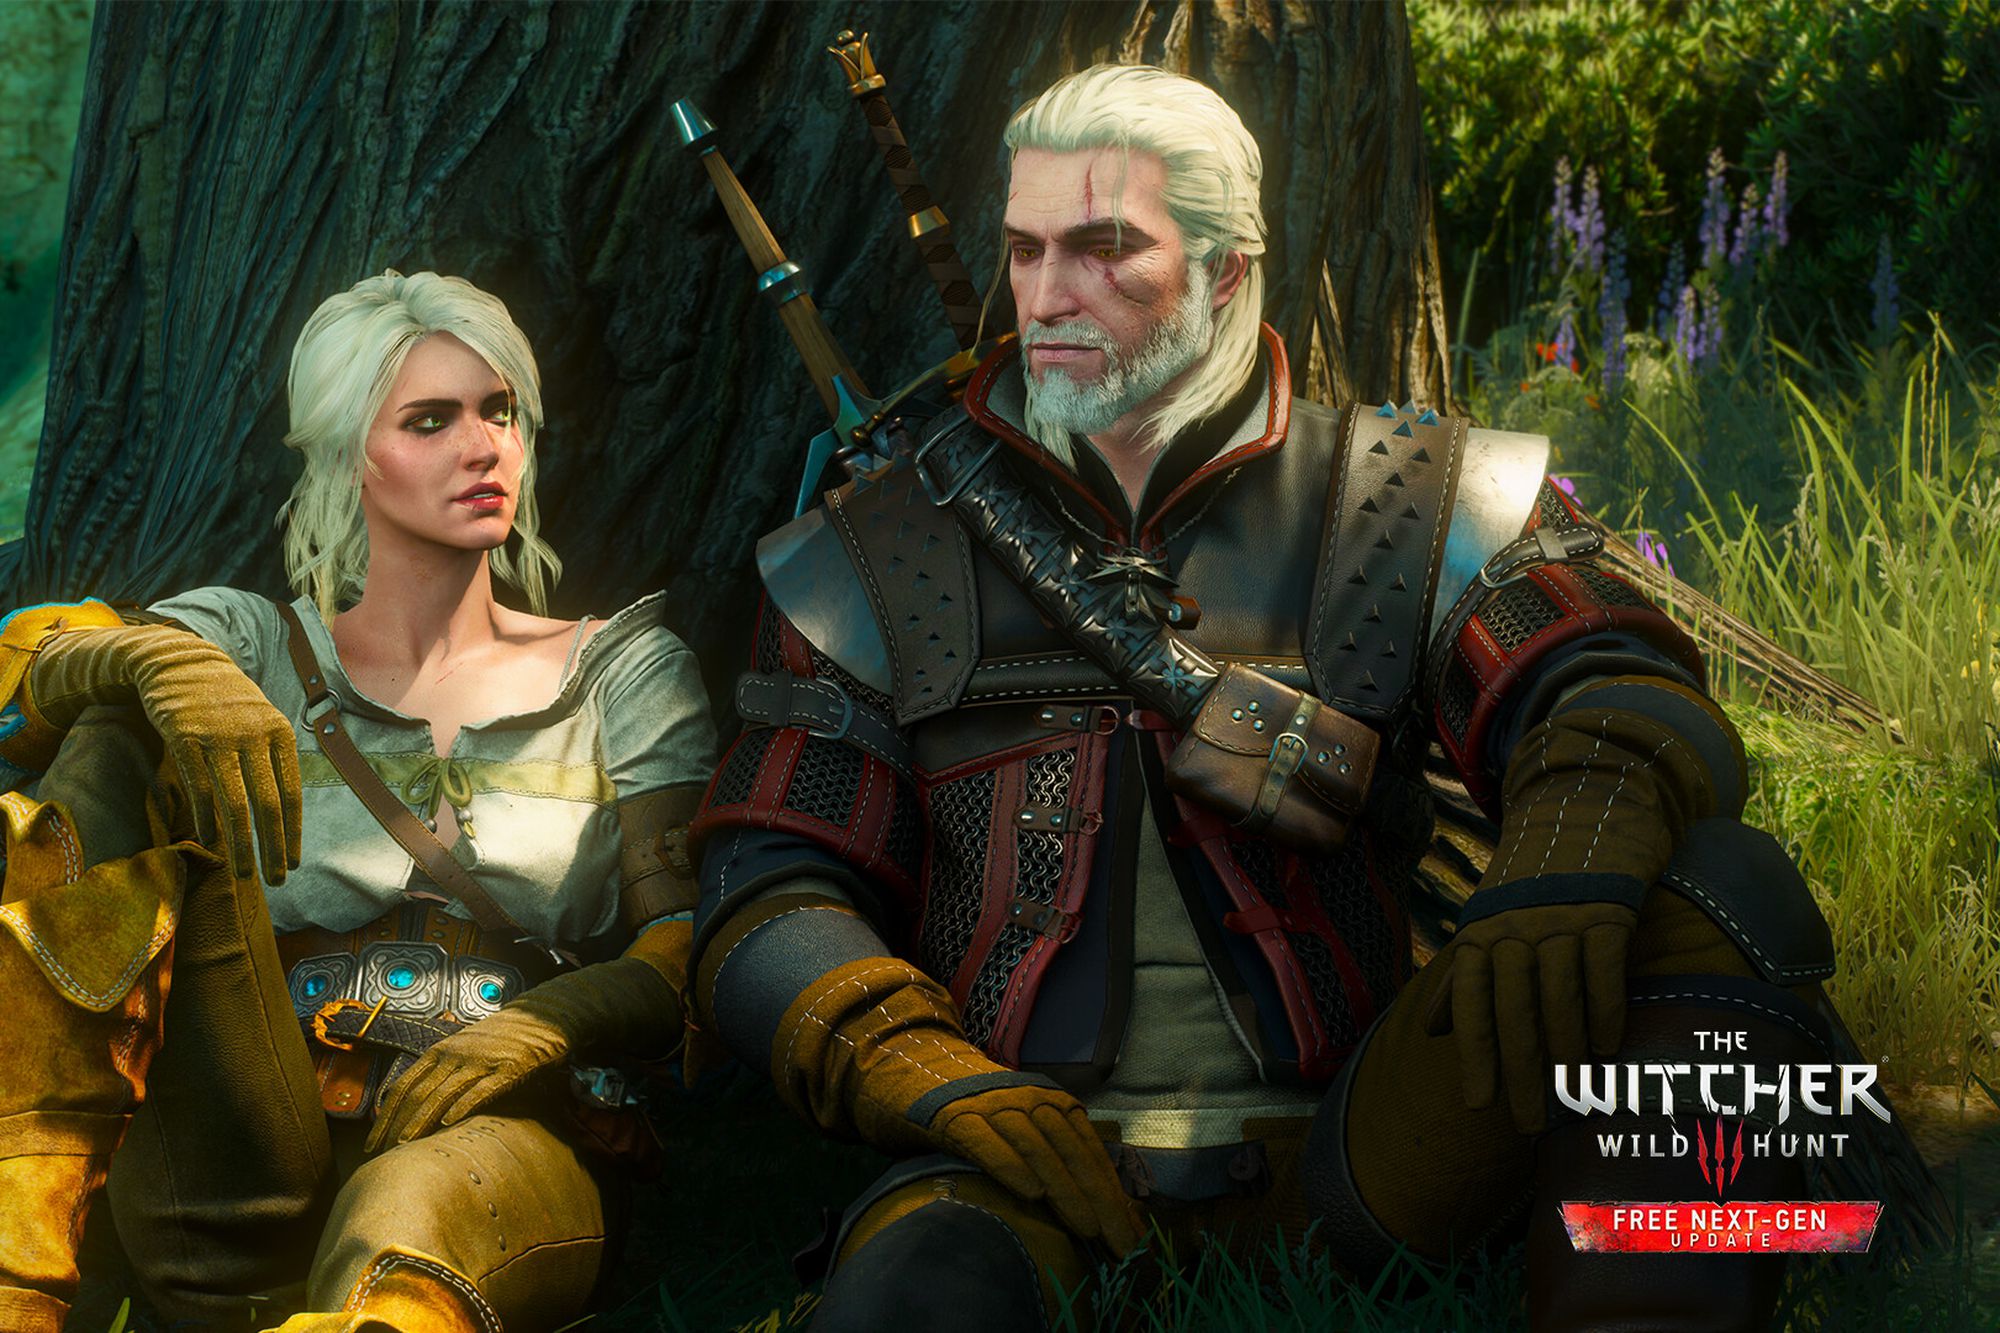 THE WITCHER GAME